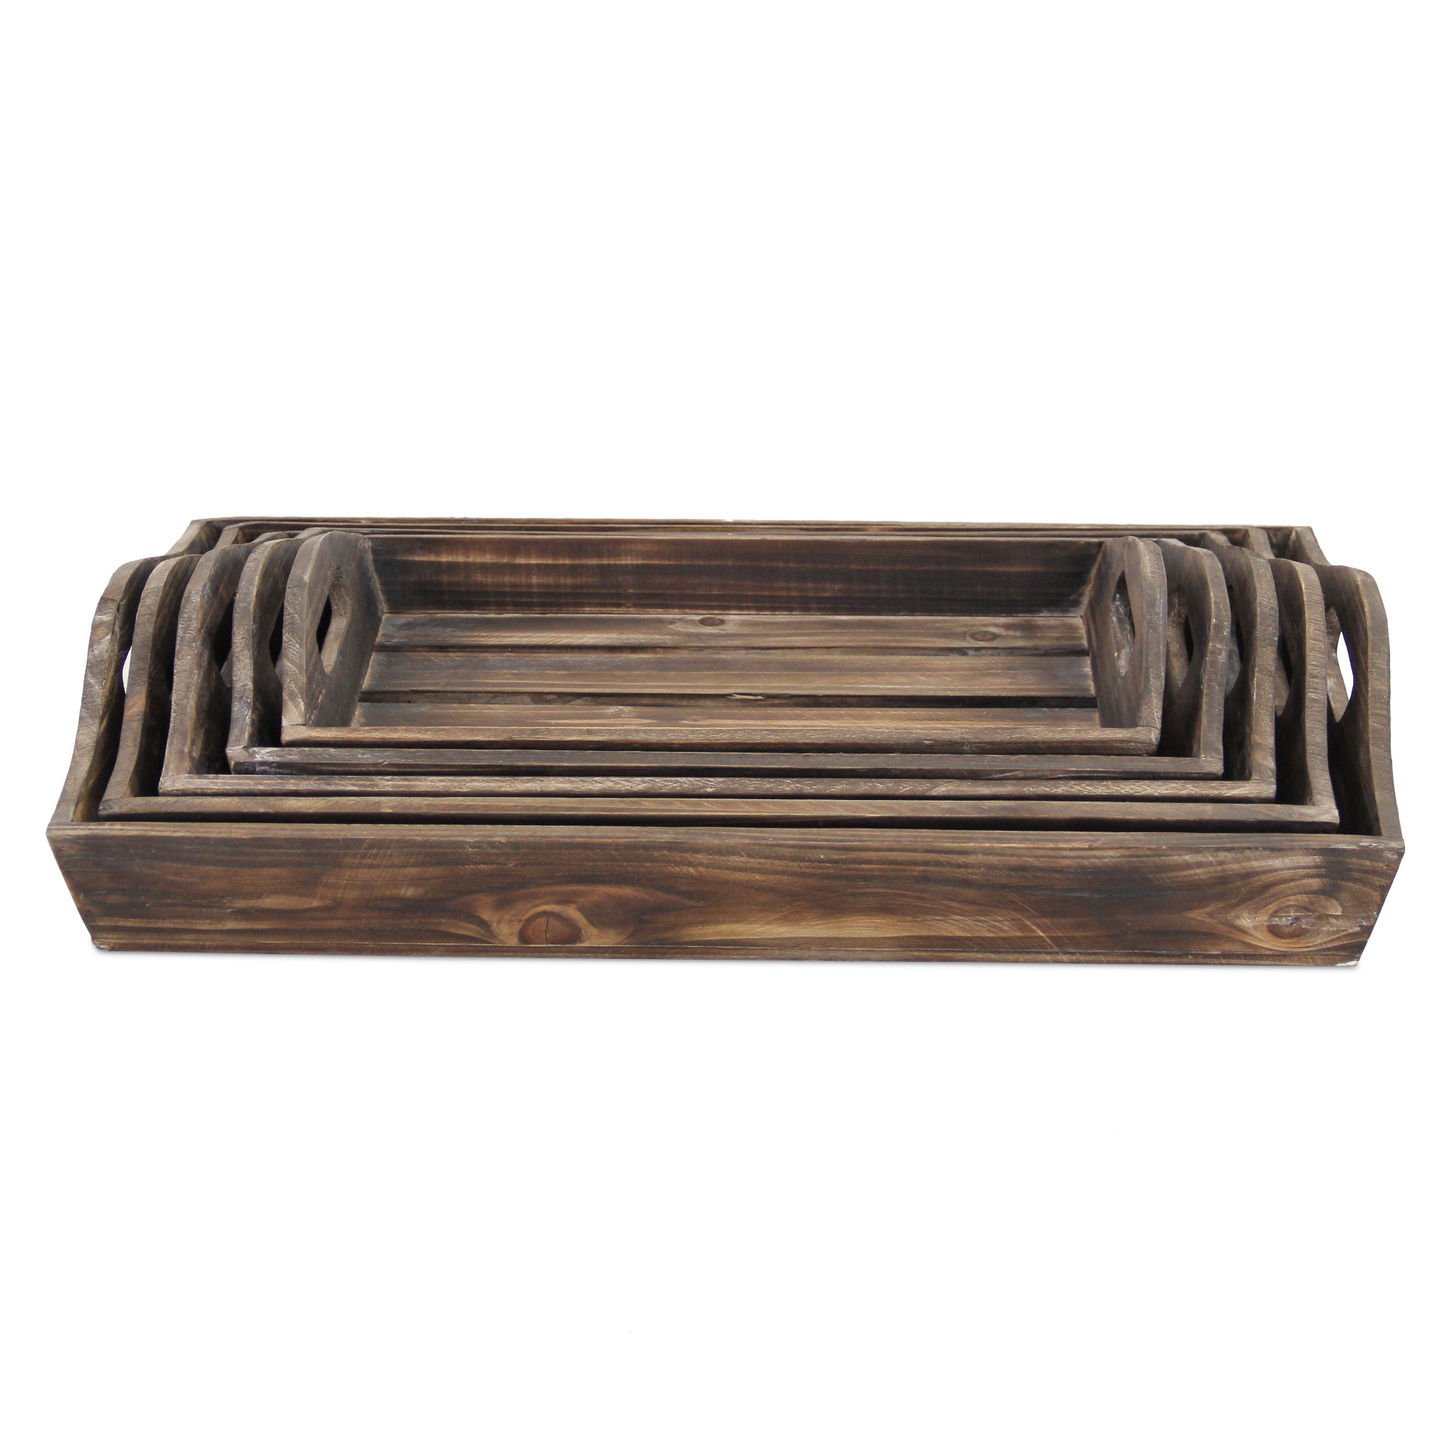 Set Of 5 Rustic Natural Brown Wood Handmade Trays With Handles